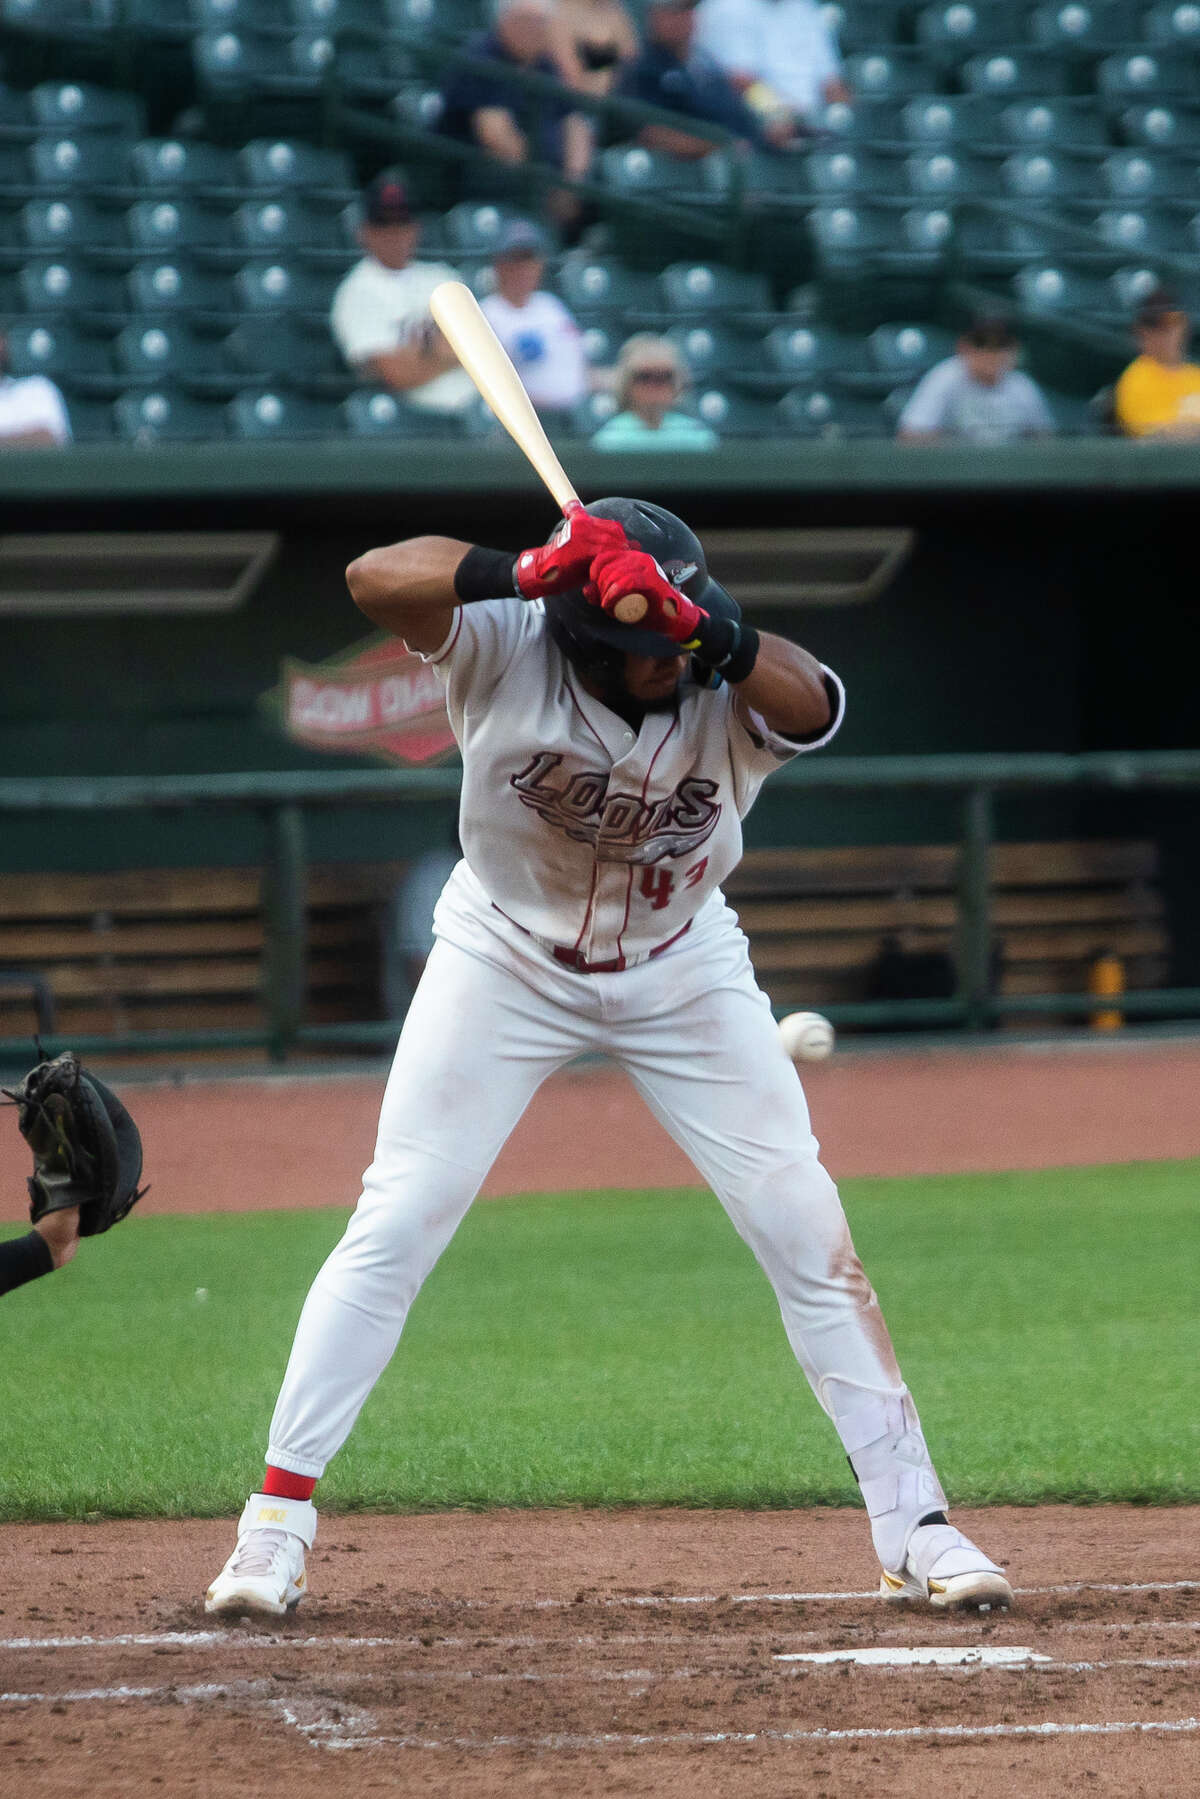 Lugnuts even series with 6-3 win over Loons